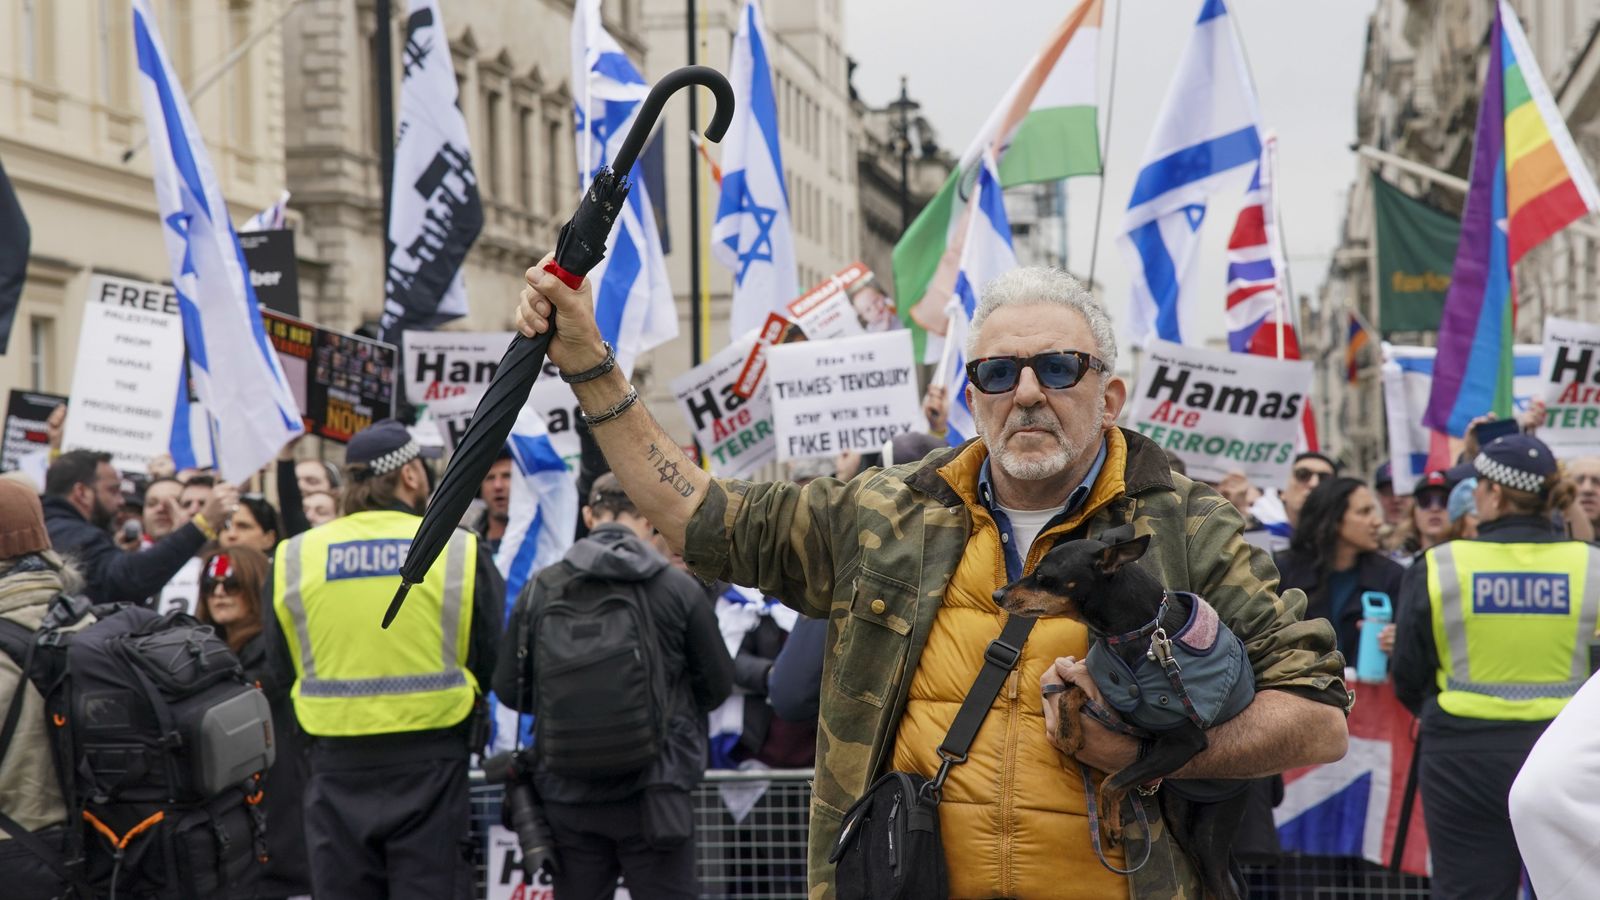 man arrested for carrying swastika placard and another held for racist remarks at pro-palestinian march